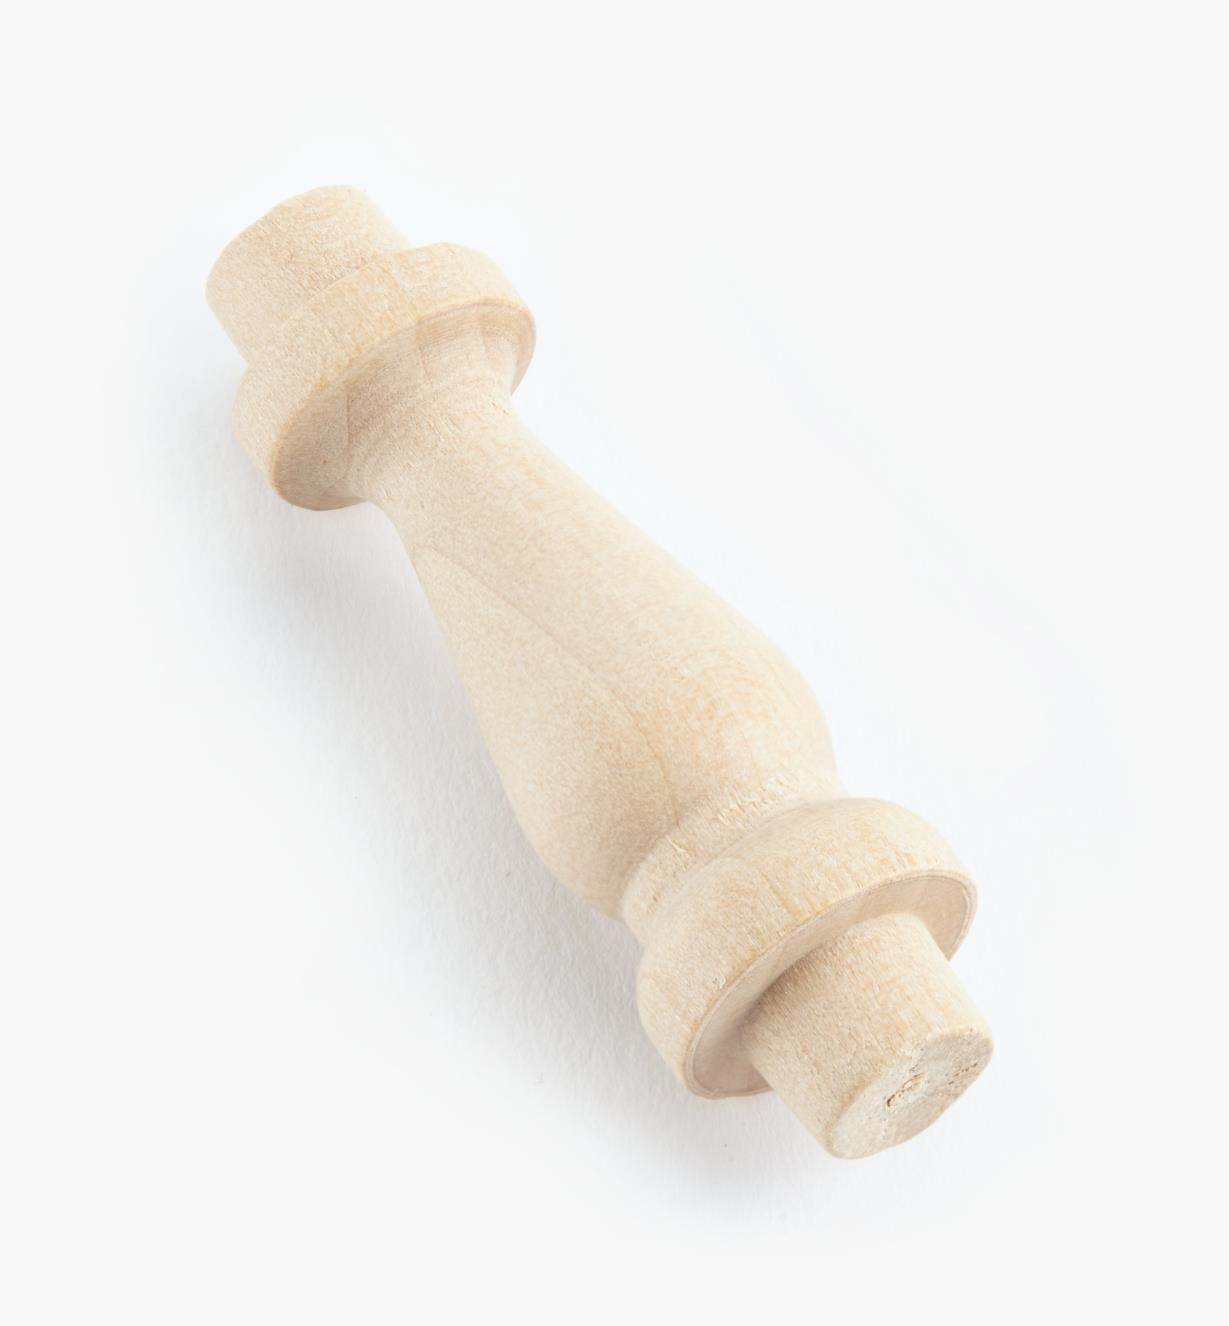 41K1081 - Spindle, 2" x 5/8"